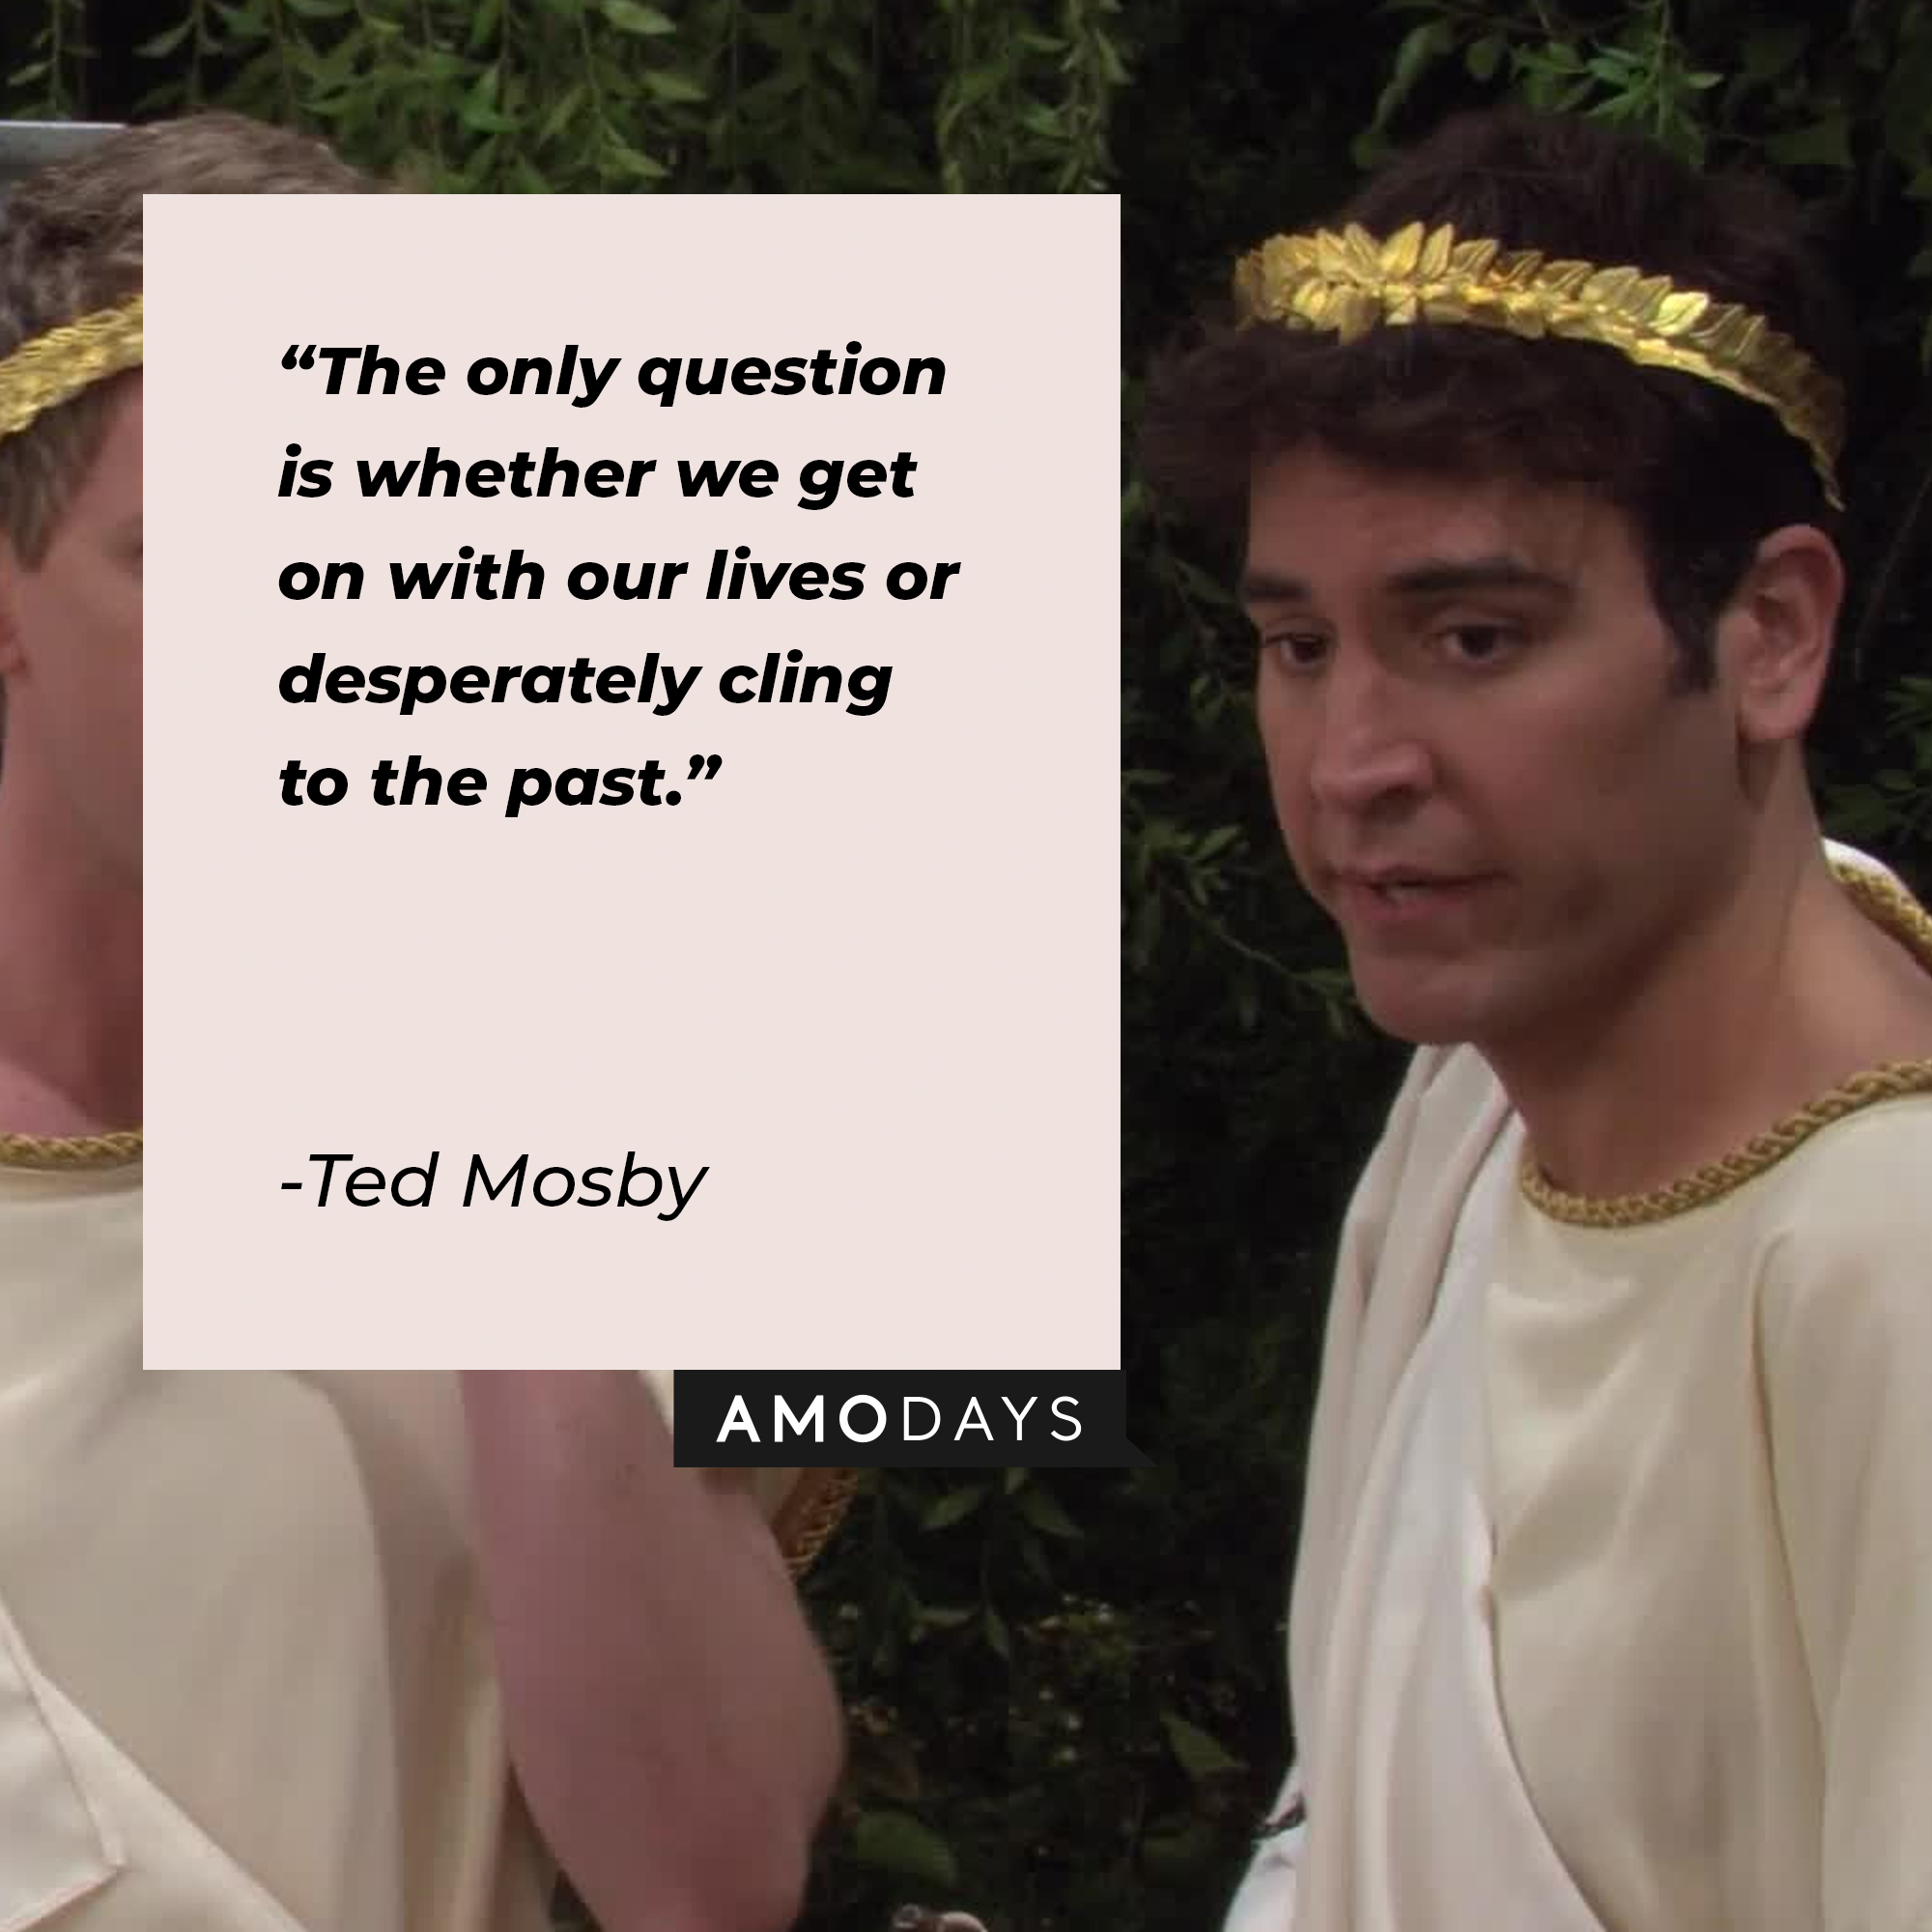 A picture of Ted Mosby with his quote, “The only question is whether we get on with our lives or desperately cling to the past." | Source: facebook.com/OfficialHowIMetYourMother